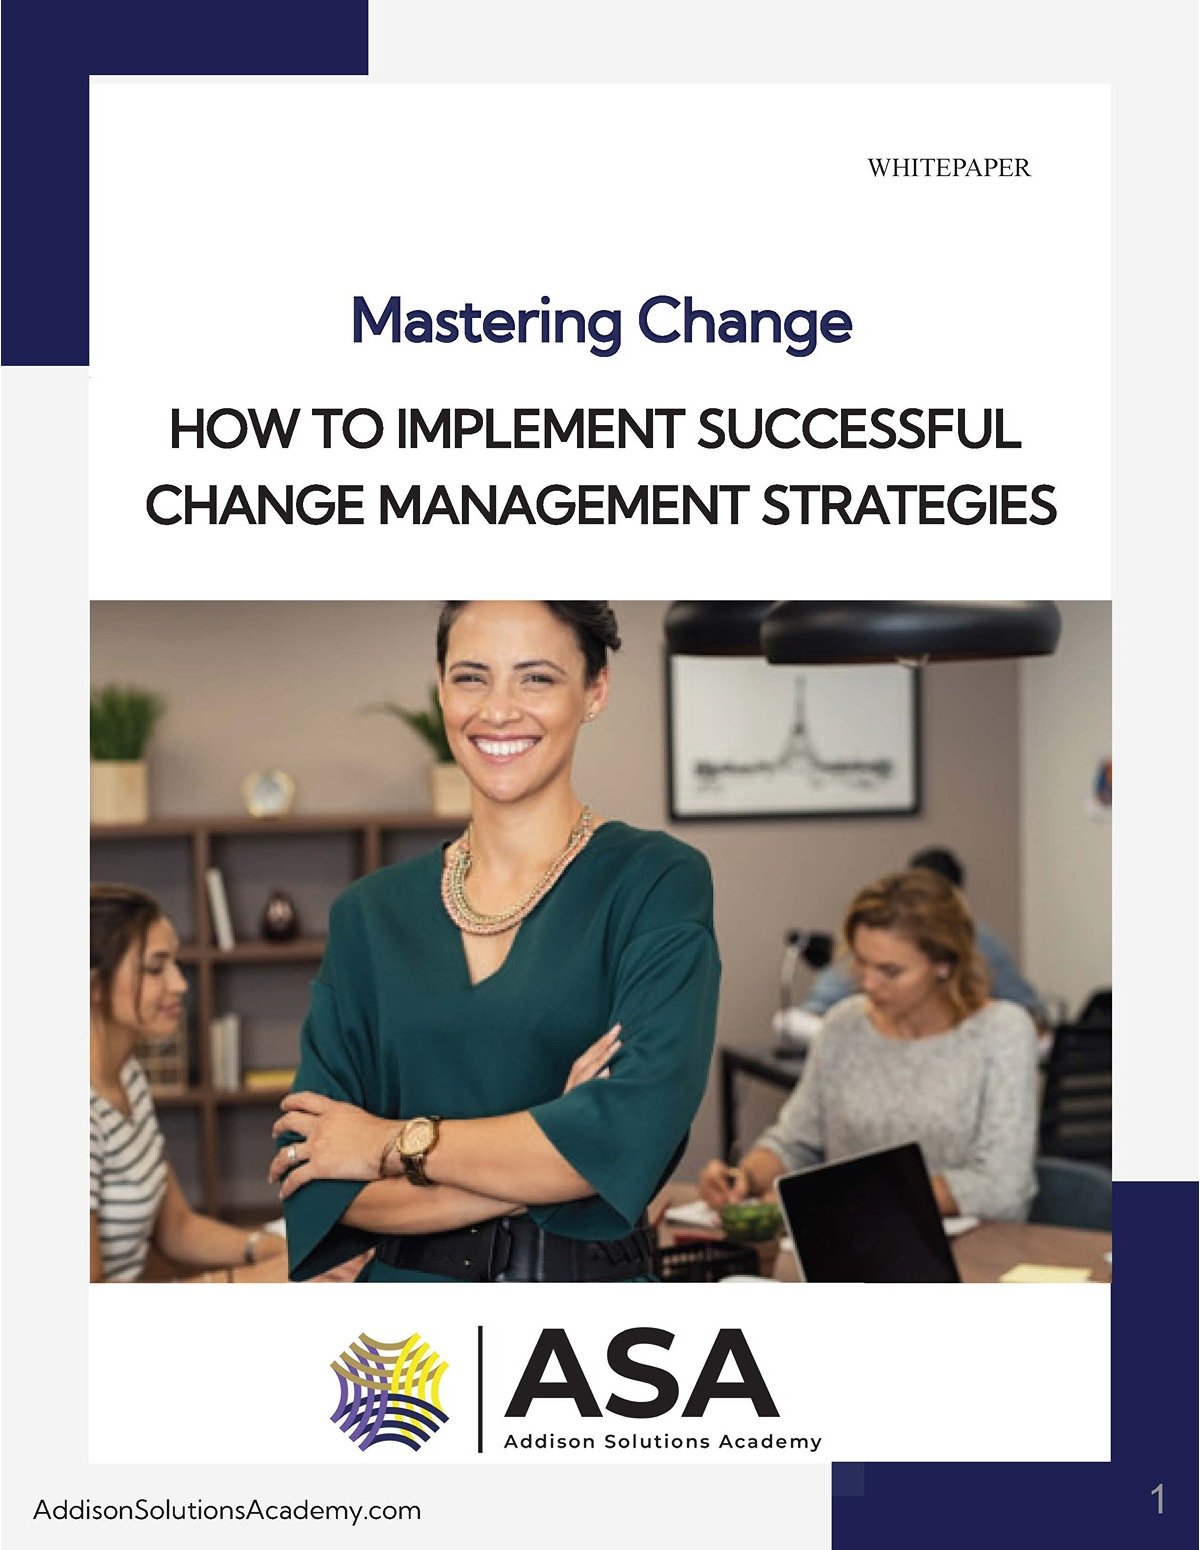 Mastering Change: How to Implement Successful Change Management Strategies